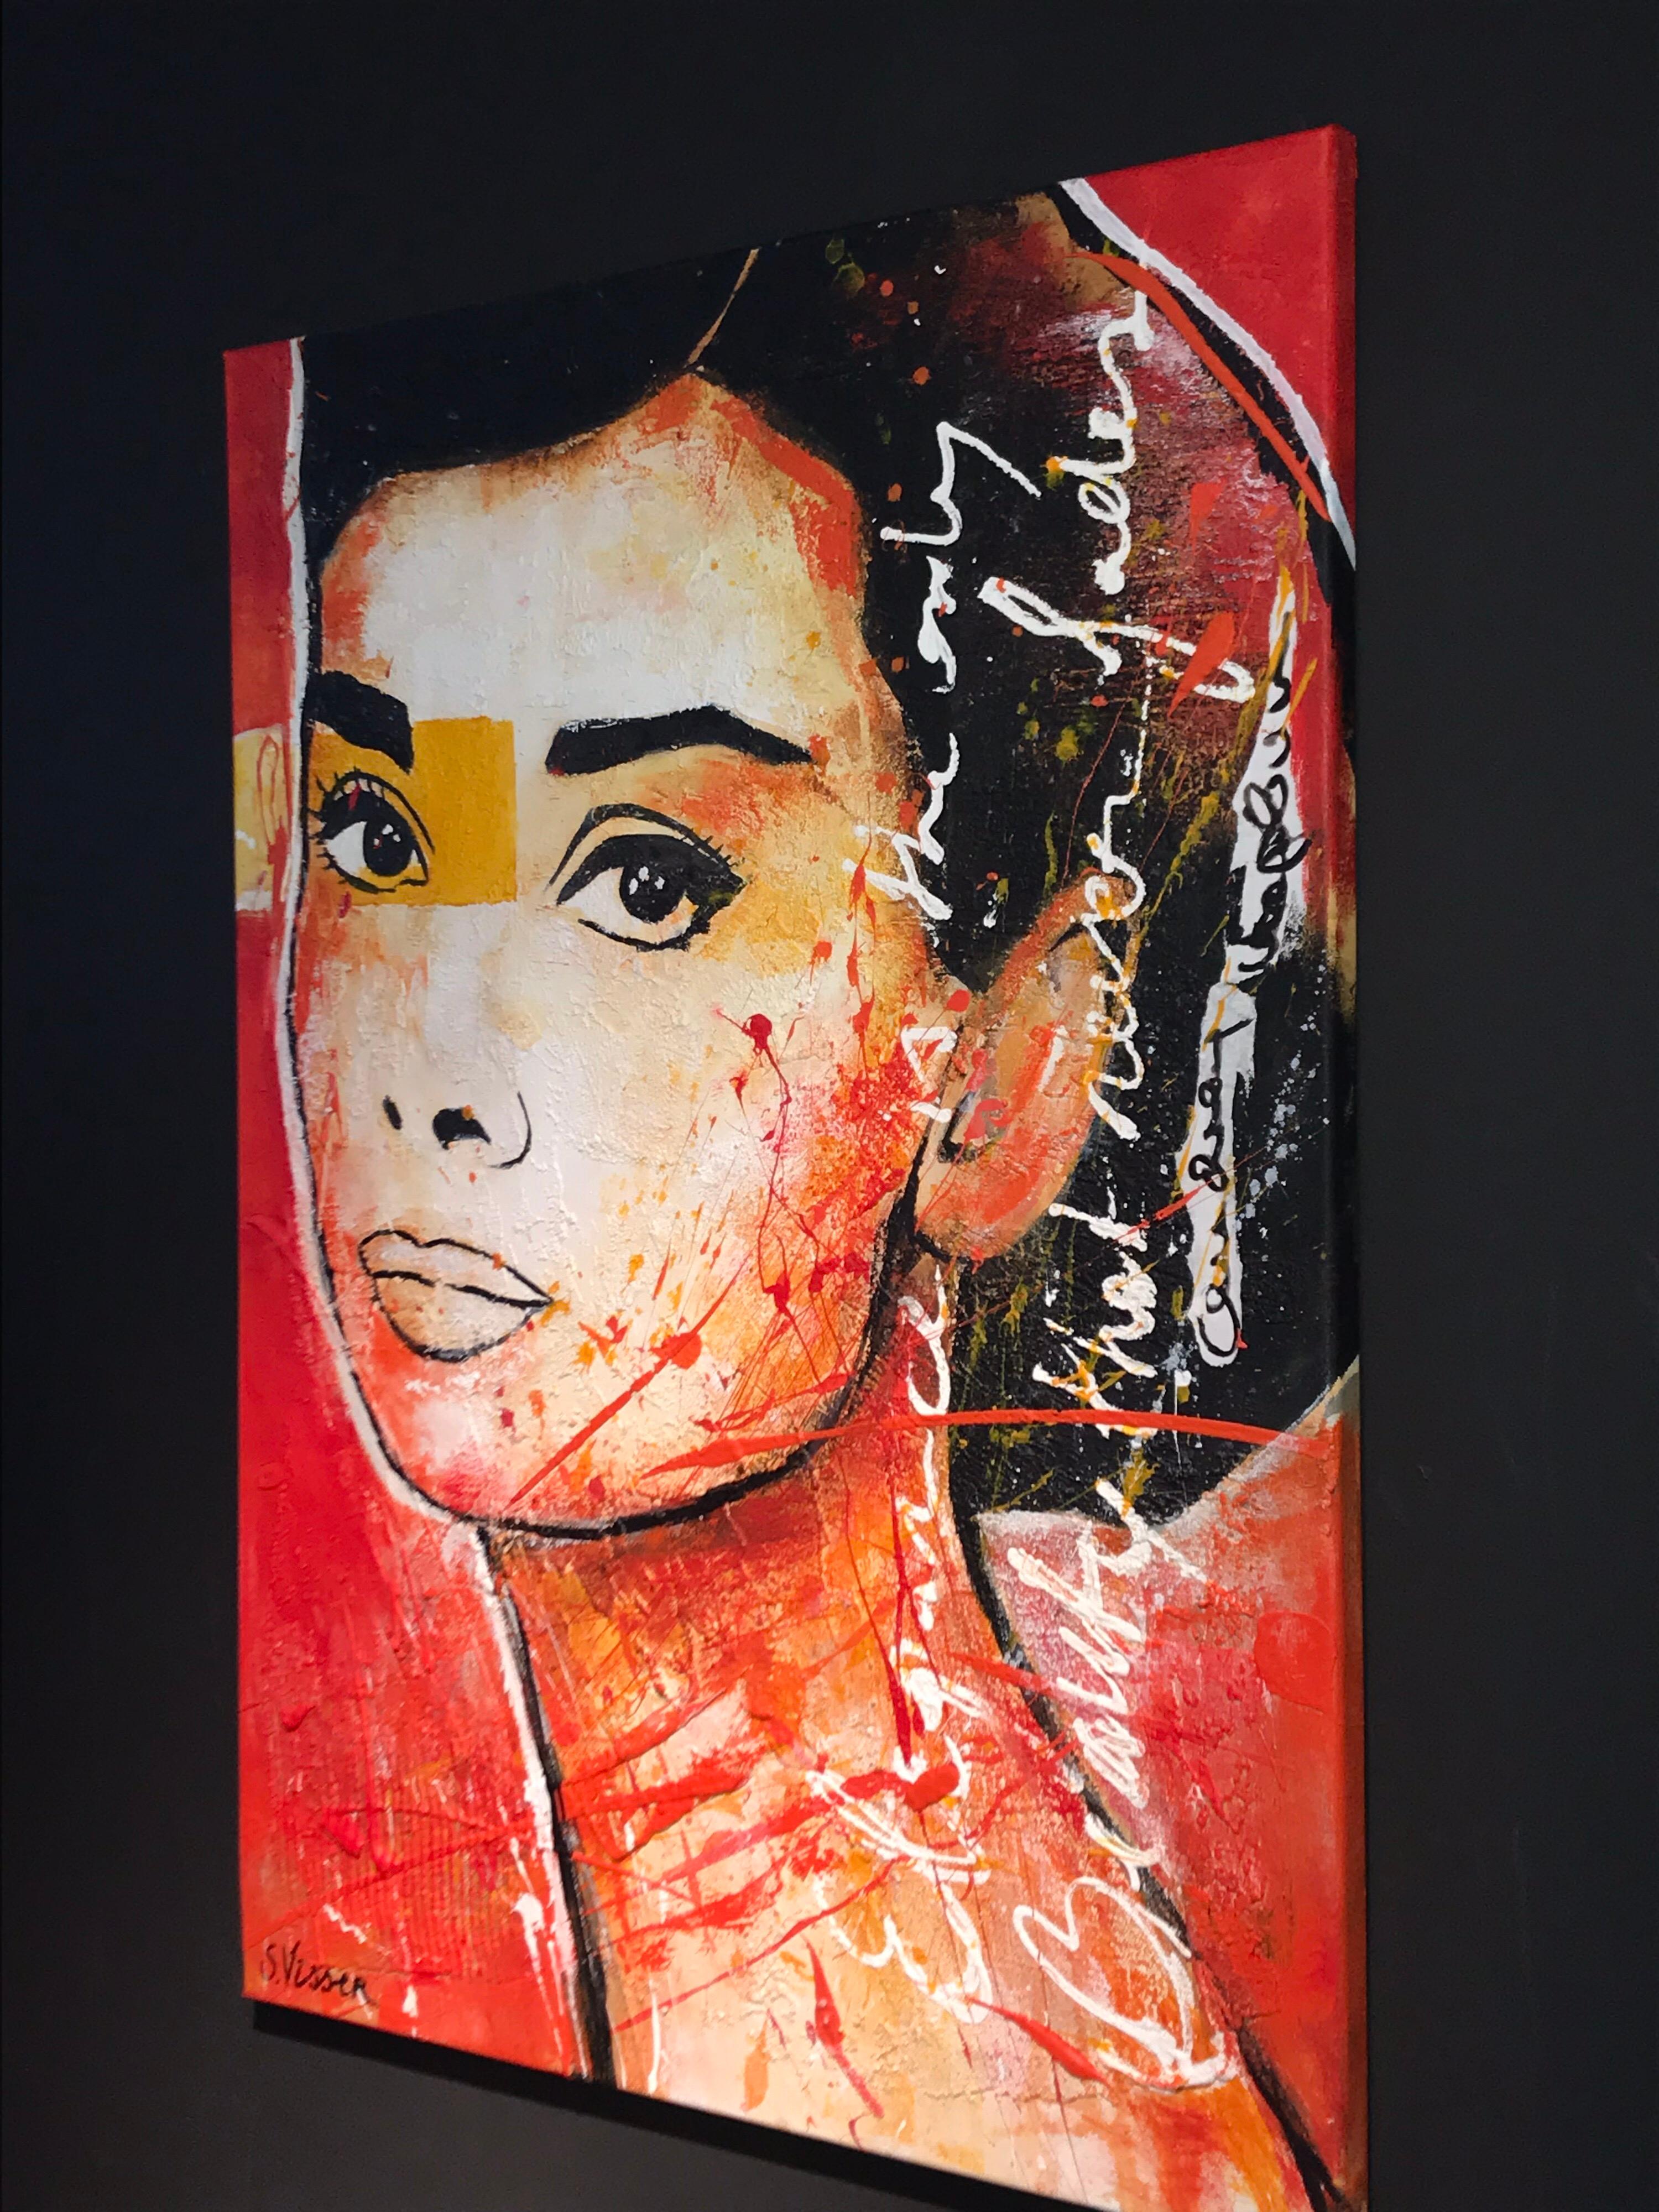 Audrey - Acryl on canvas - Mixed technique - Handsigned Cert. of auth. - Modern Painting by Suzanne Visser